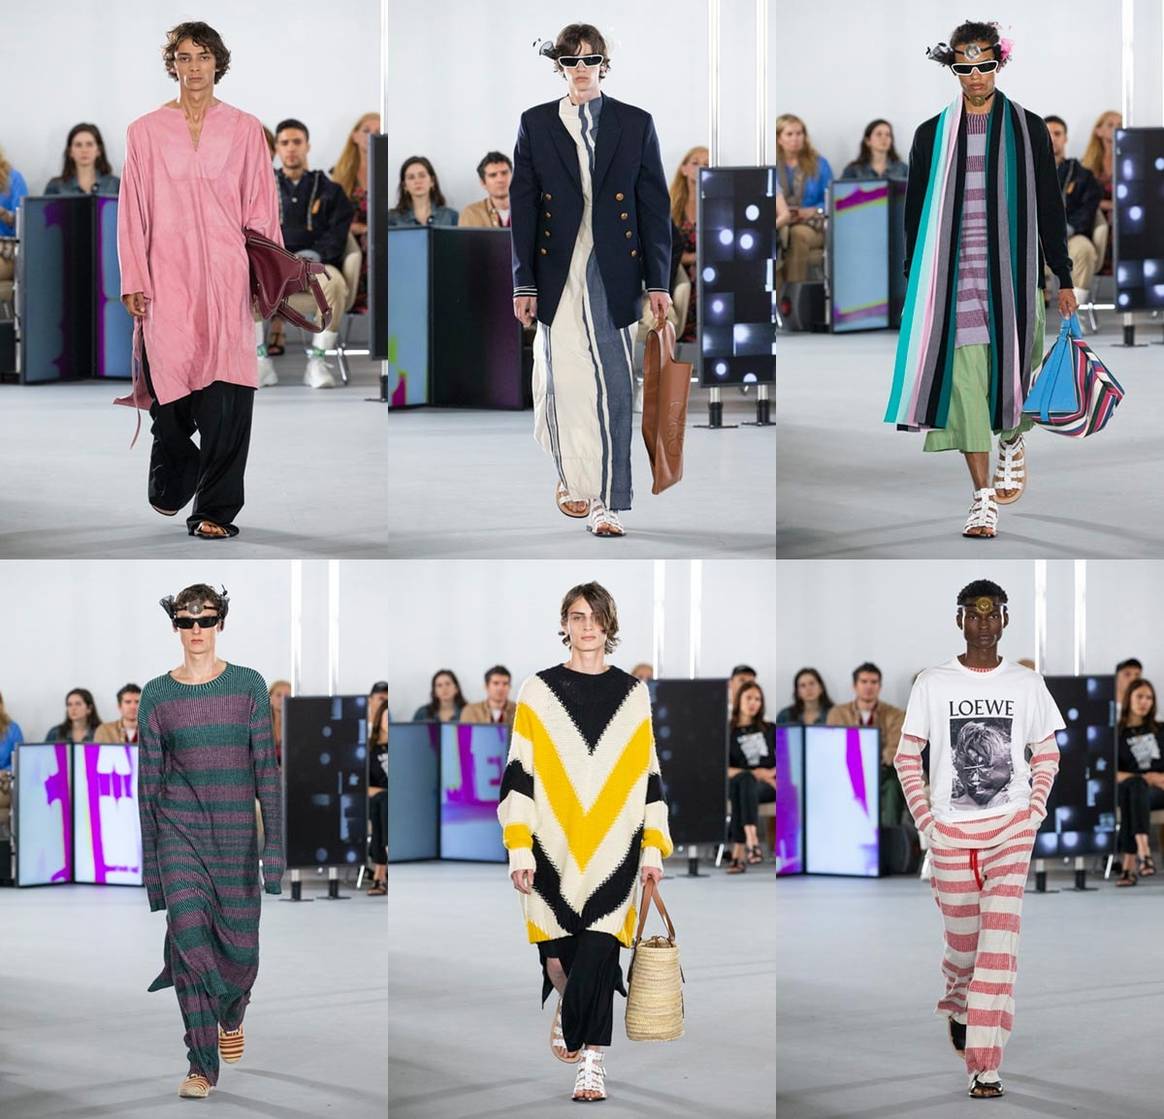 In pictures: Loewe brings dream-like SS20 collection to PFWM